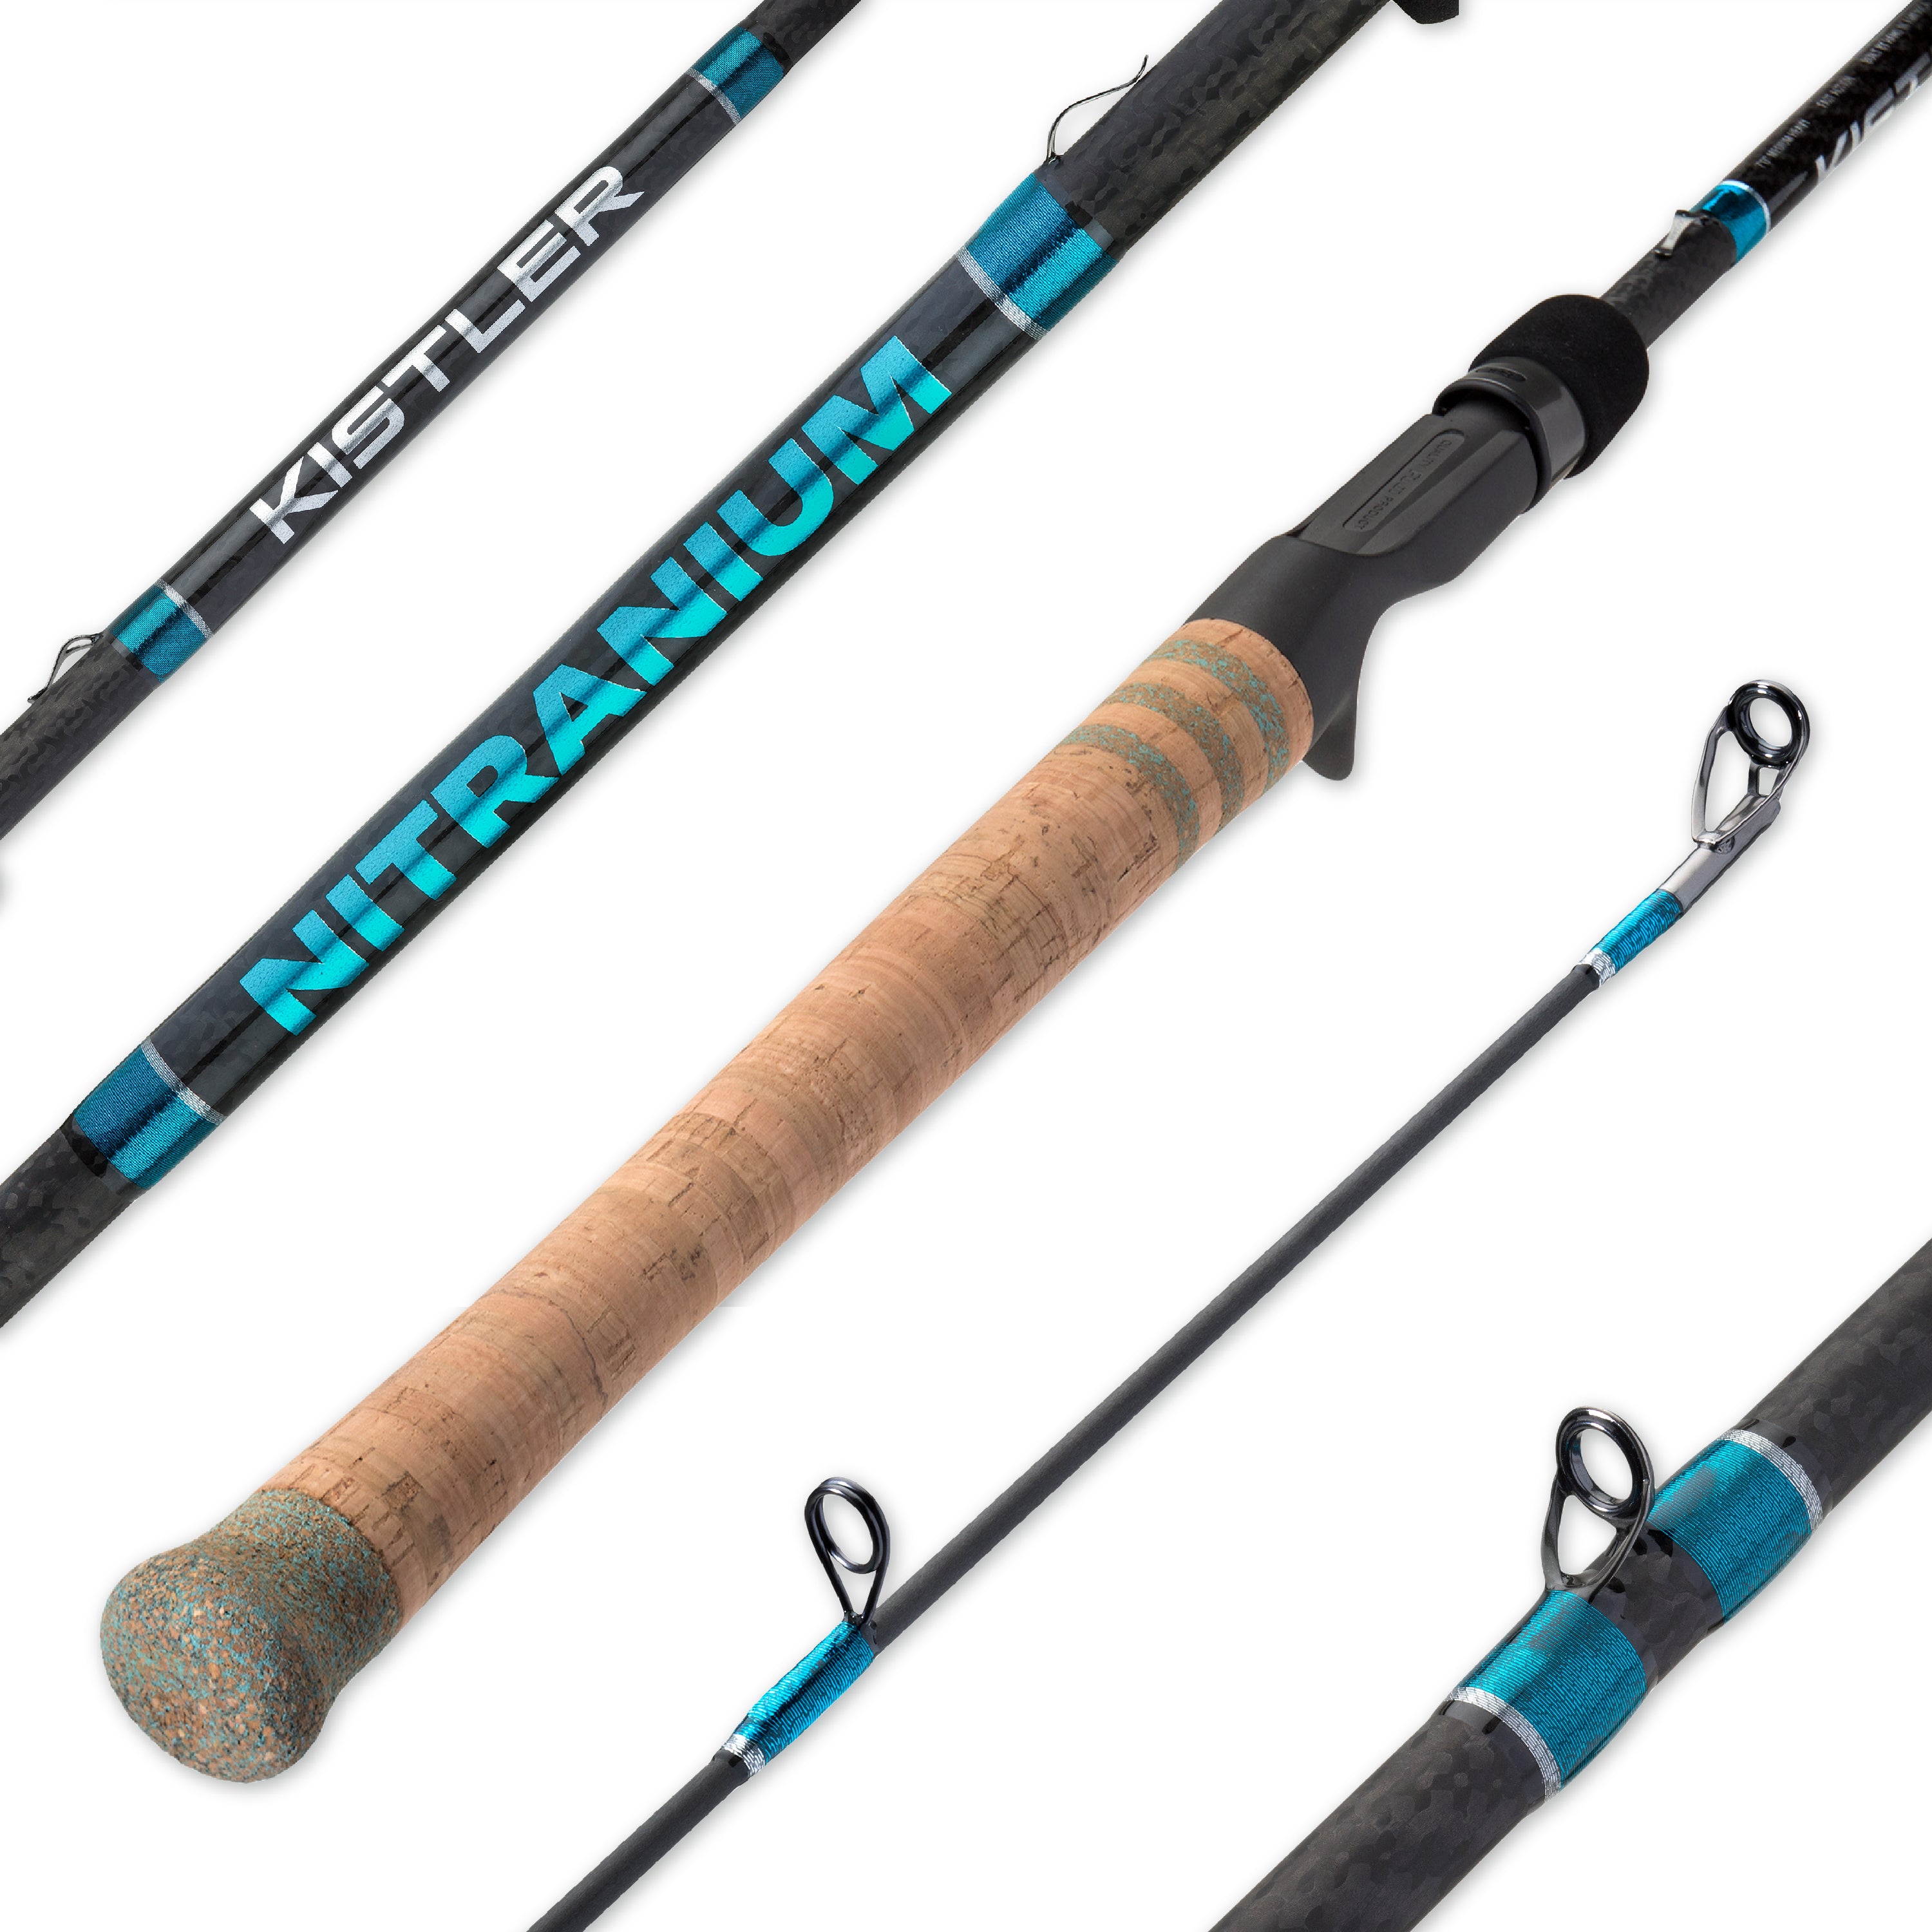 Travel Fishing Rod, Lightweight High Strength High Performance Carbon  Fishing Rod for Carp, Rod & Reel Combos -  Canada